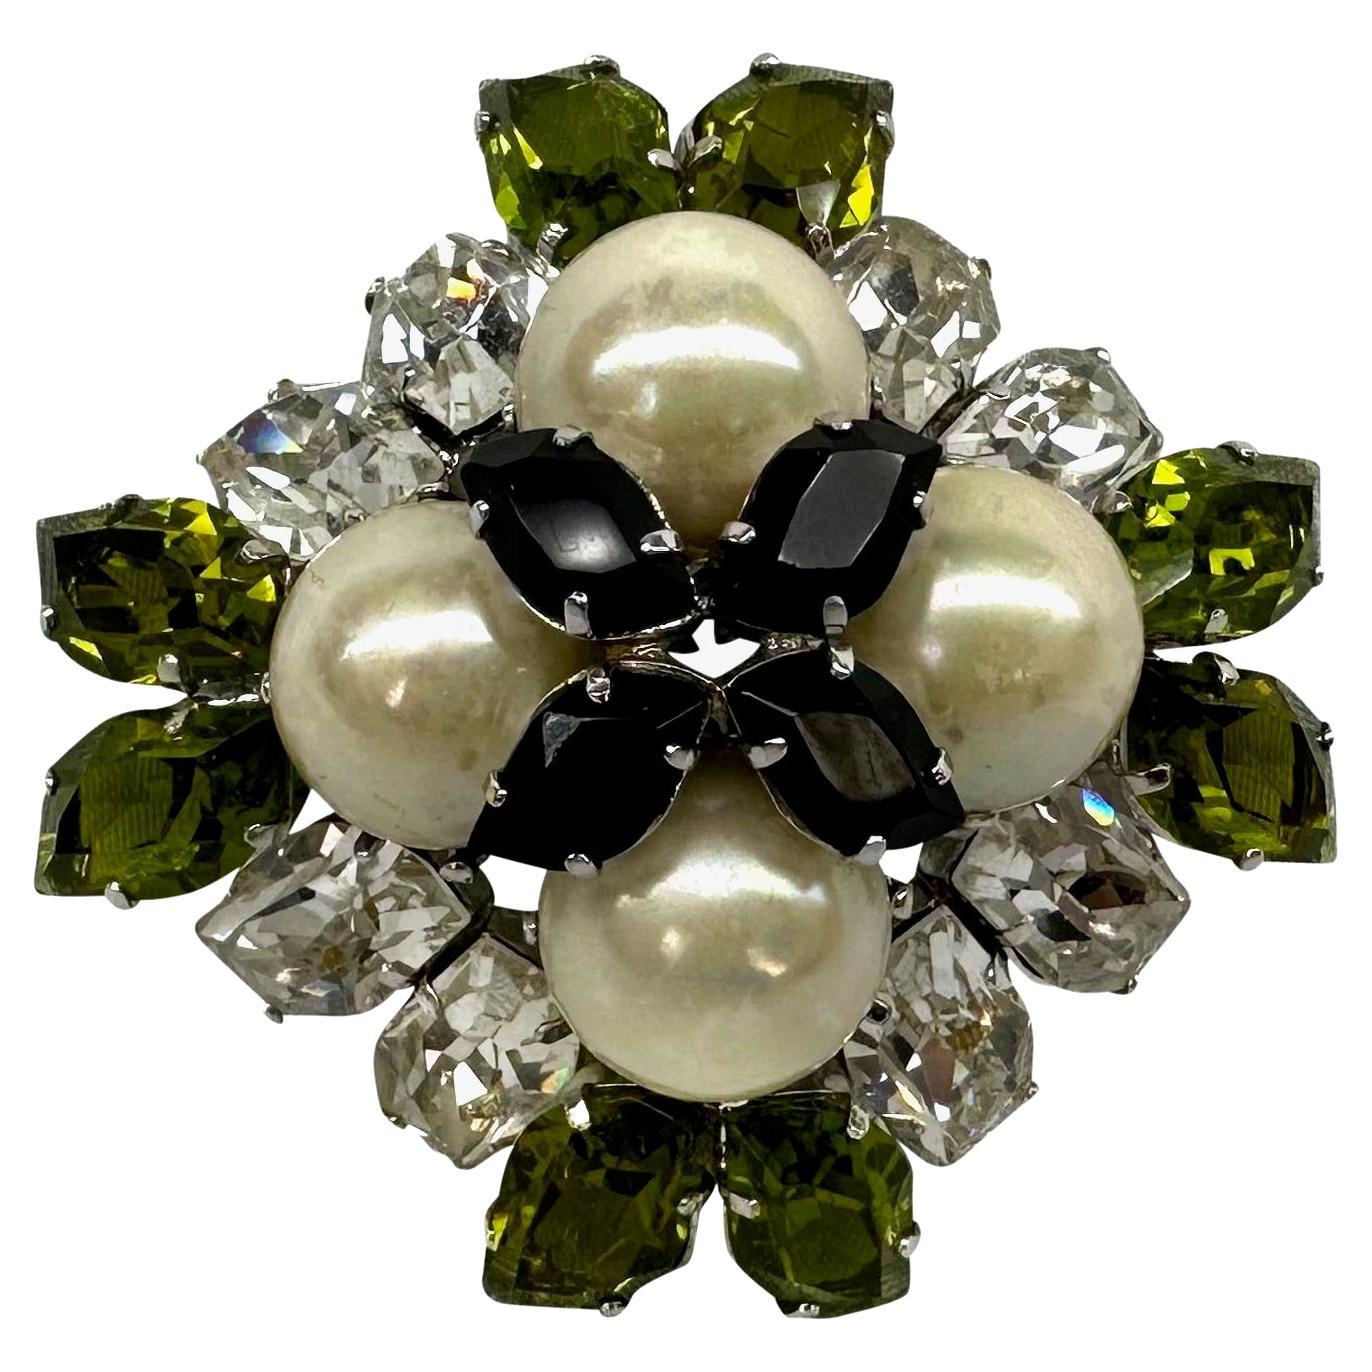 Presenting a stunning faux crystal and pearl Christian Dior brooch. From 1959, this large and opulent brooch features a diamond shape made complete with faux pearls and green, clear, and black crystals. From over 60 years ago, this incredible Dior